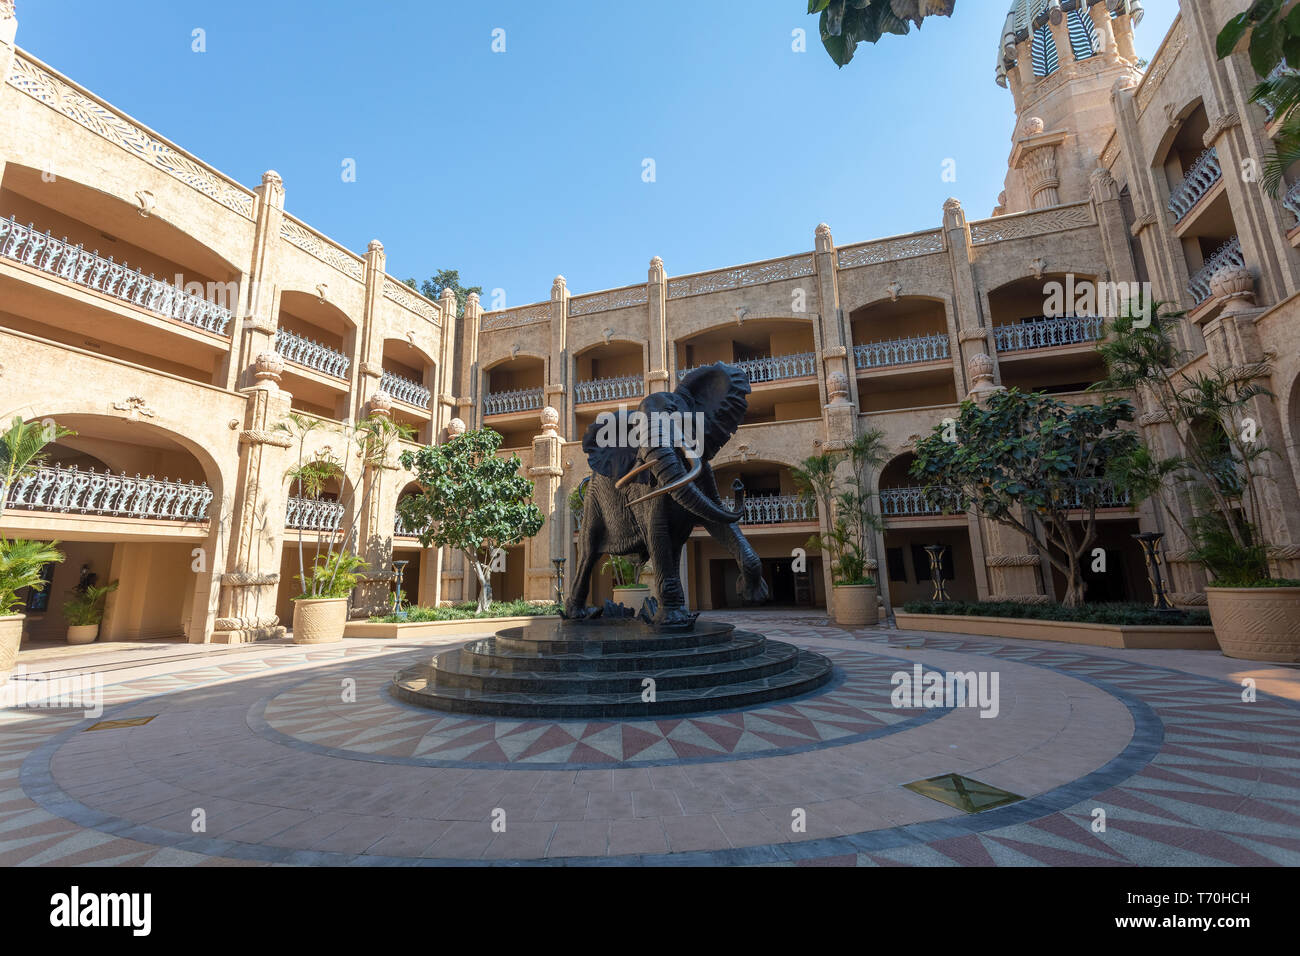 elephant in Sun City, Lost City in South Africa Stock Photo